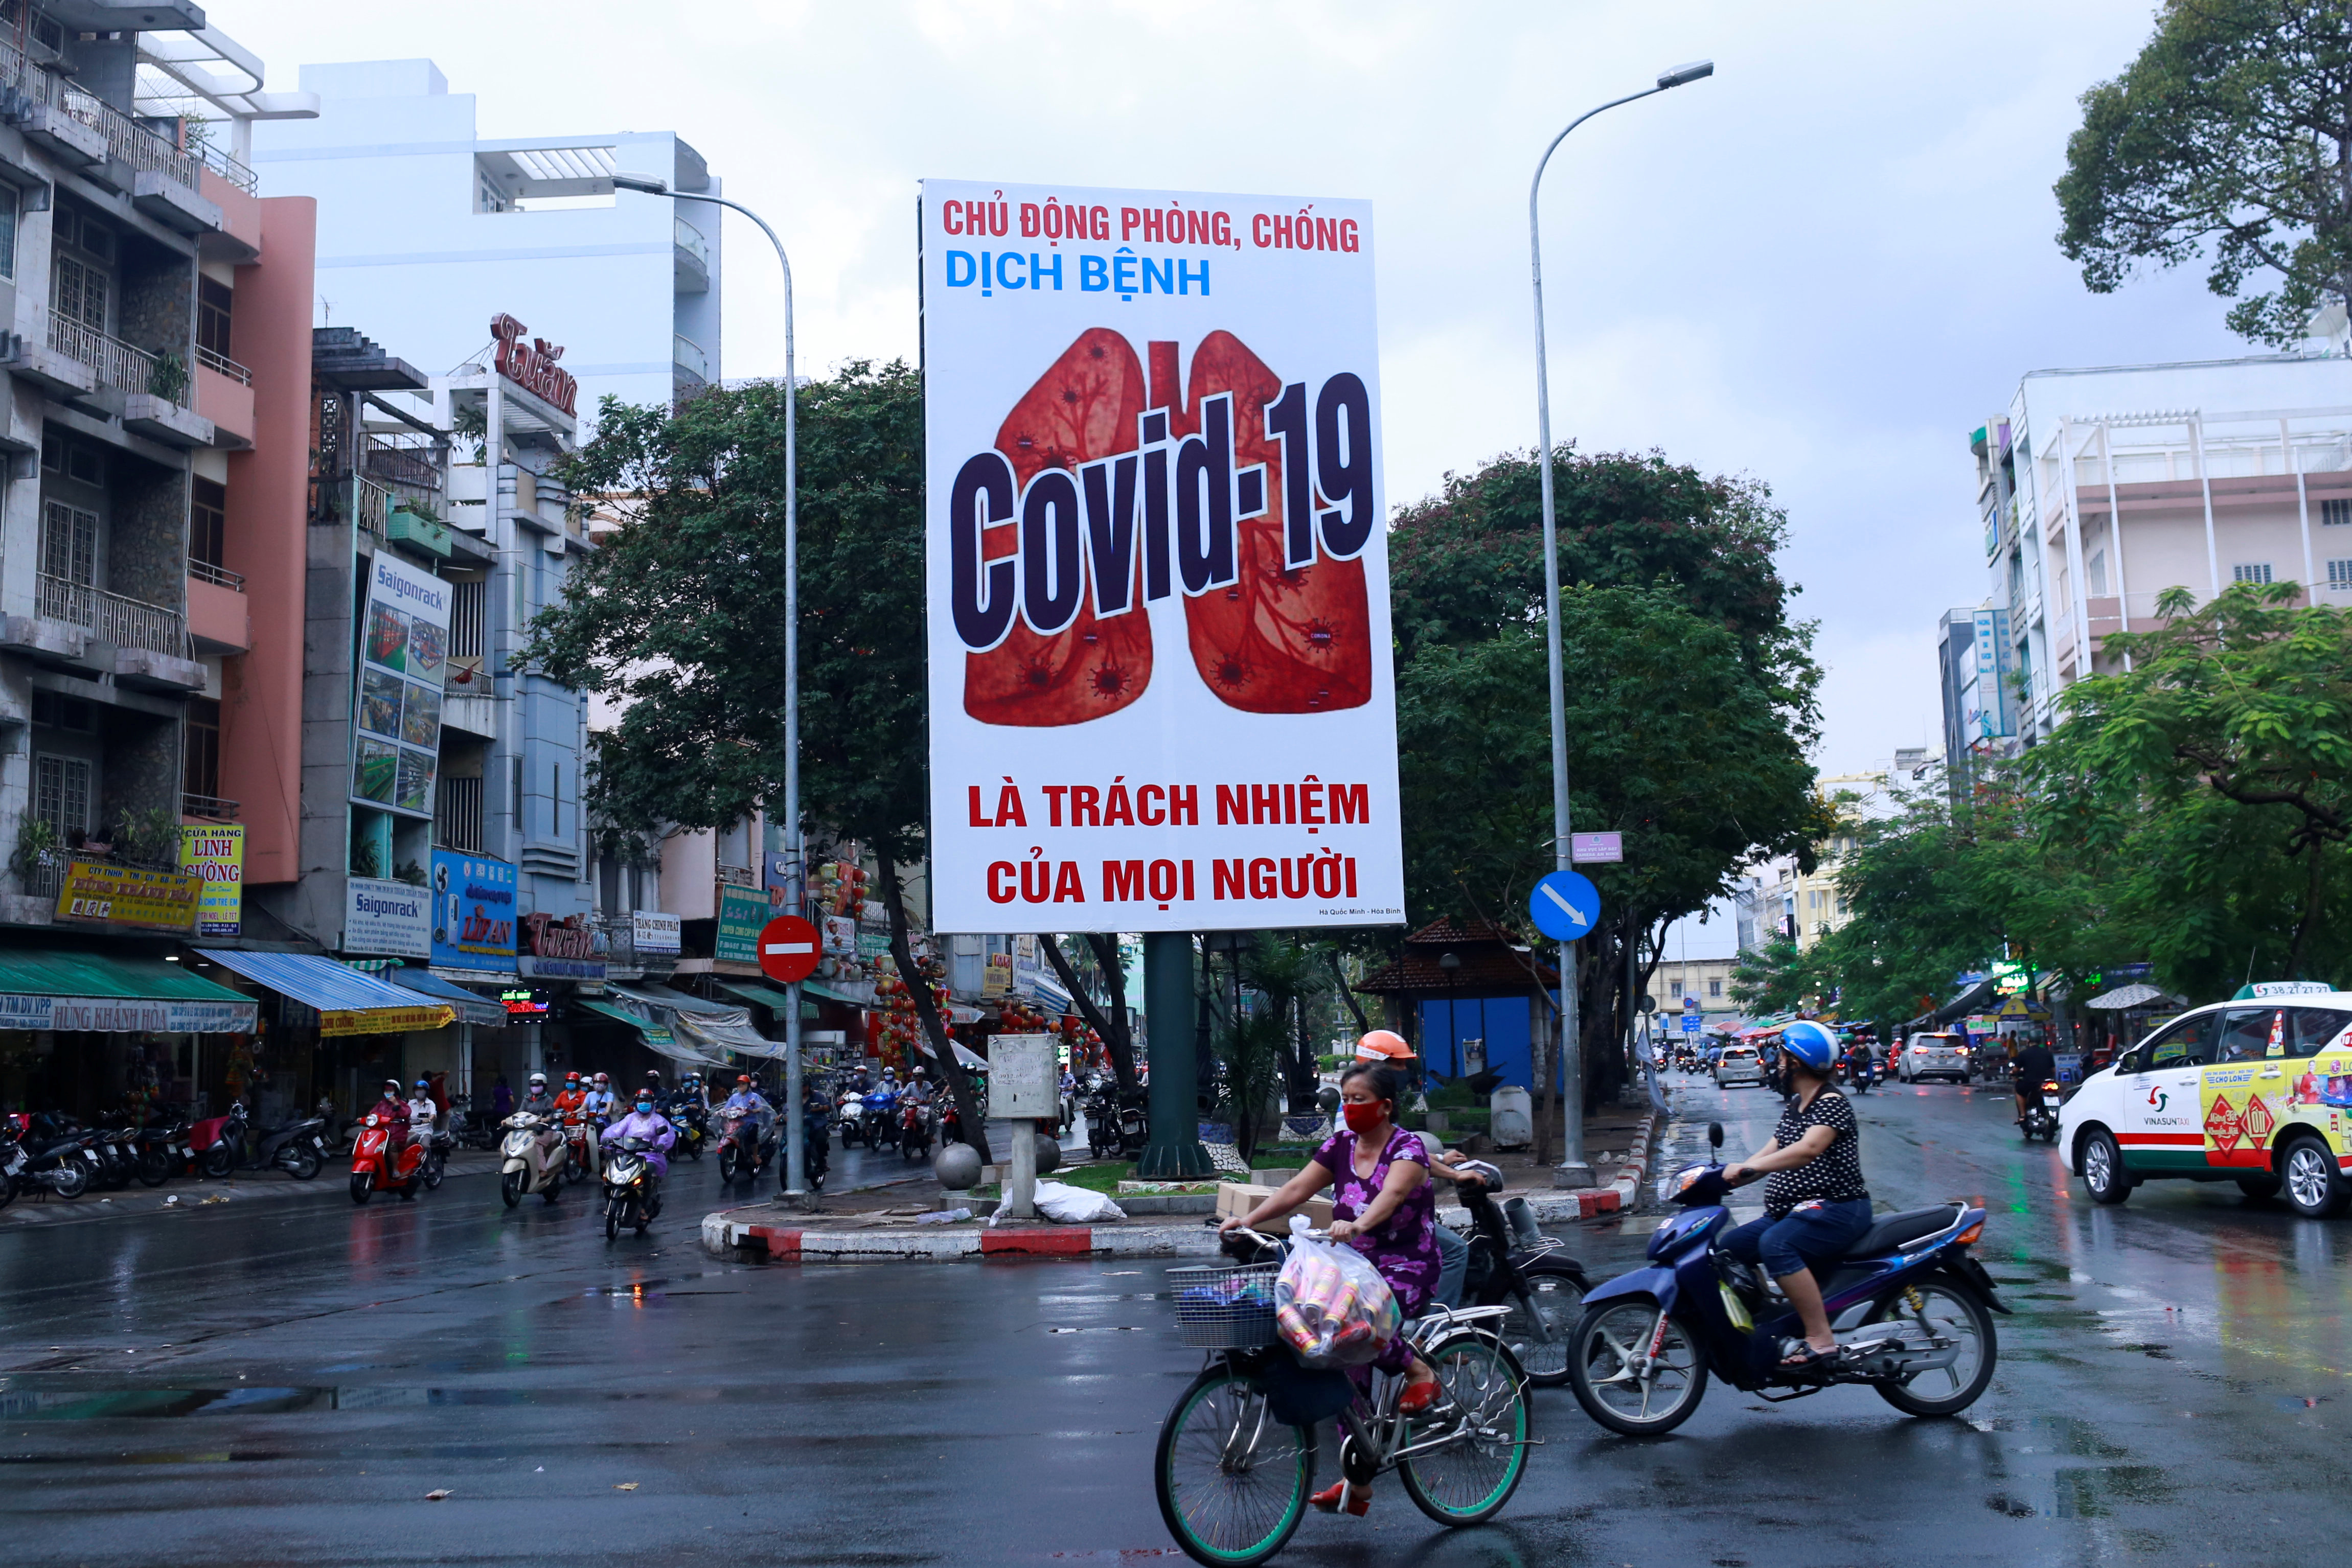 Motorbikes drive past a billboard warning against the coronavirus disease (COVID-19) after the government eased nationwide lockdown during the outbreak in Ho Chi Minh, Vietnam, April 25, 2020. REUTERS/Yen Duong